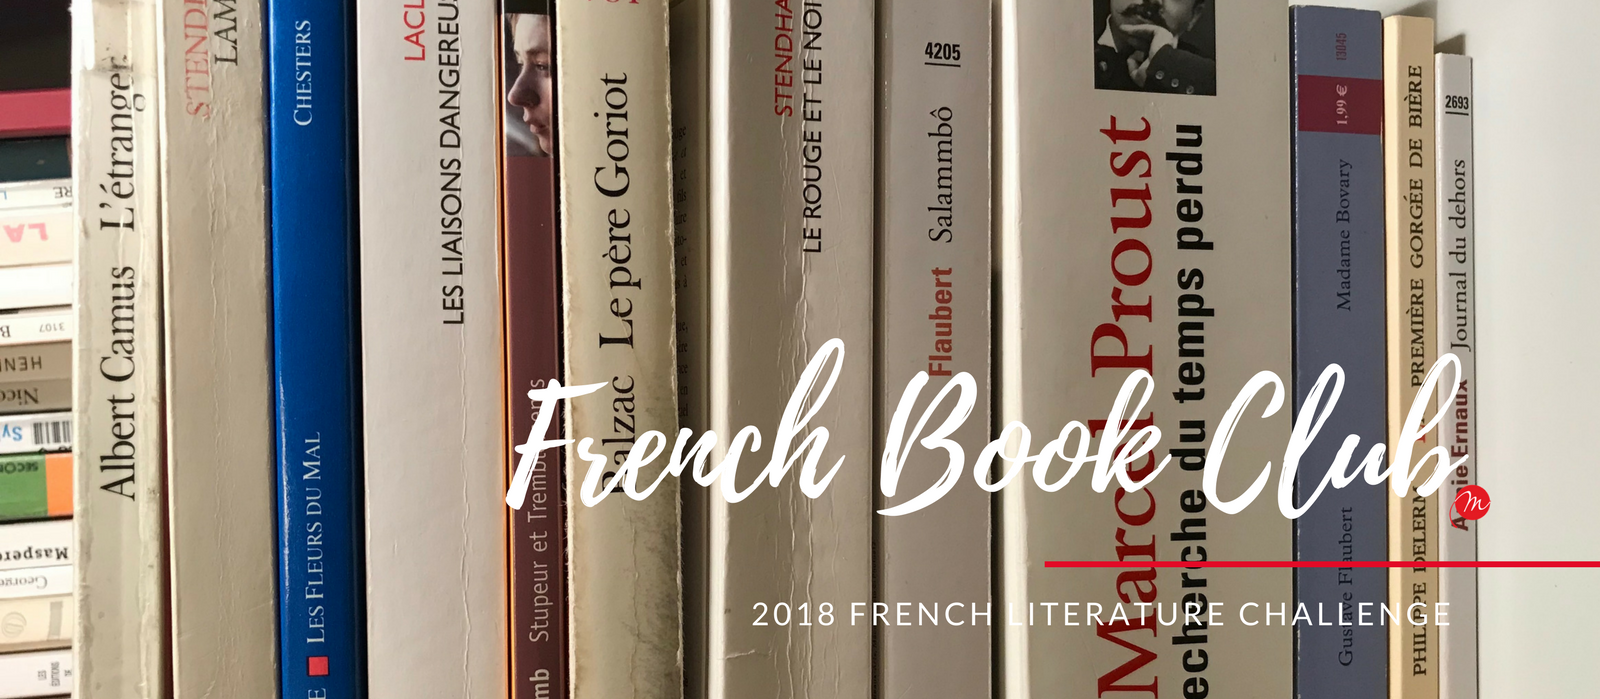 MyFrenchLife™ – MyFrenchLife.org – MyFrenchLife™ book club: July literature challenge – Balzac, Le Père Goriot